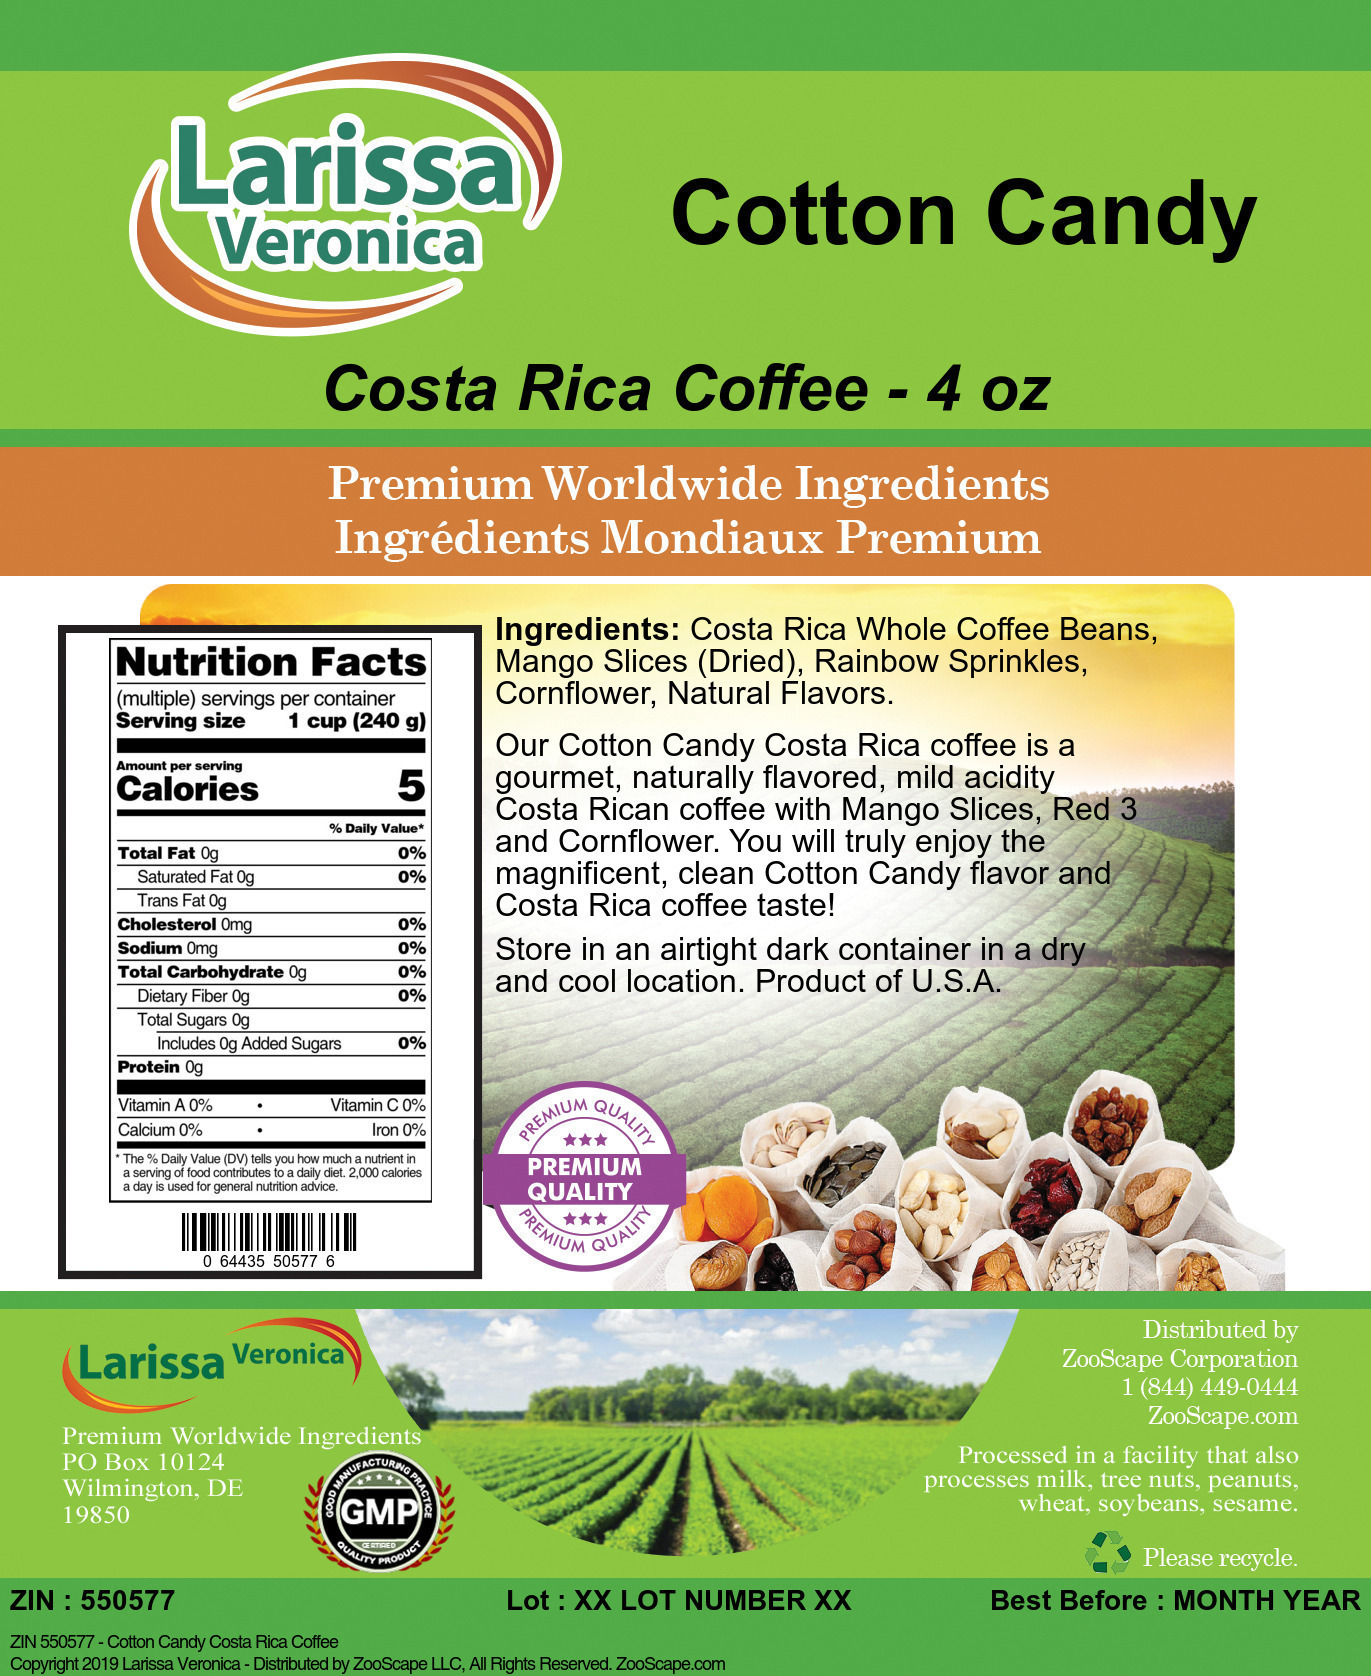 Cotton Candy Costa Rica Coffee - Label